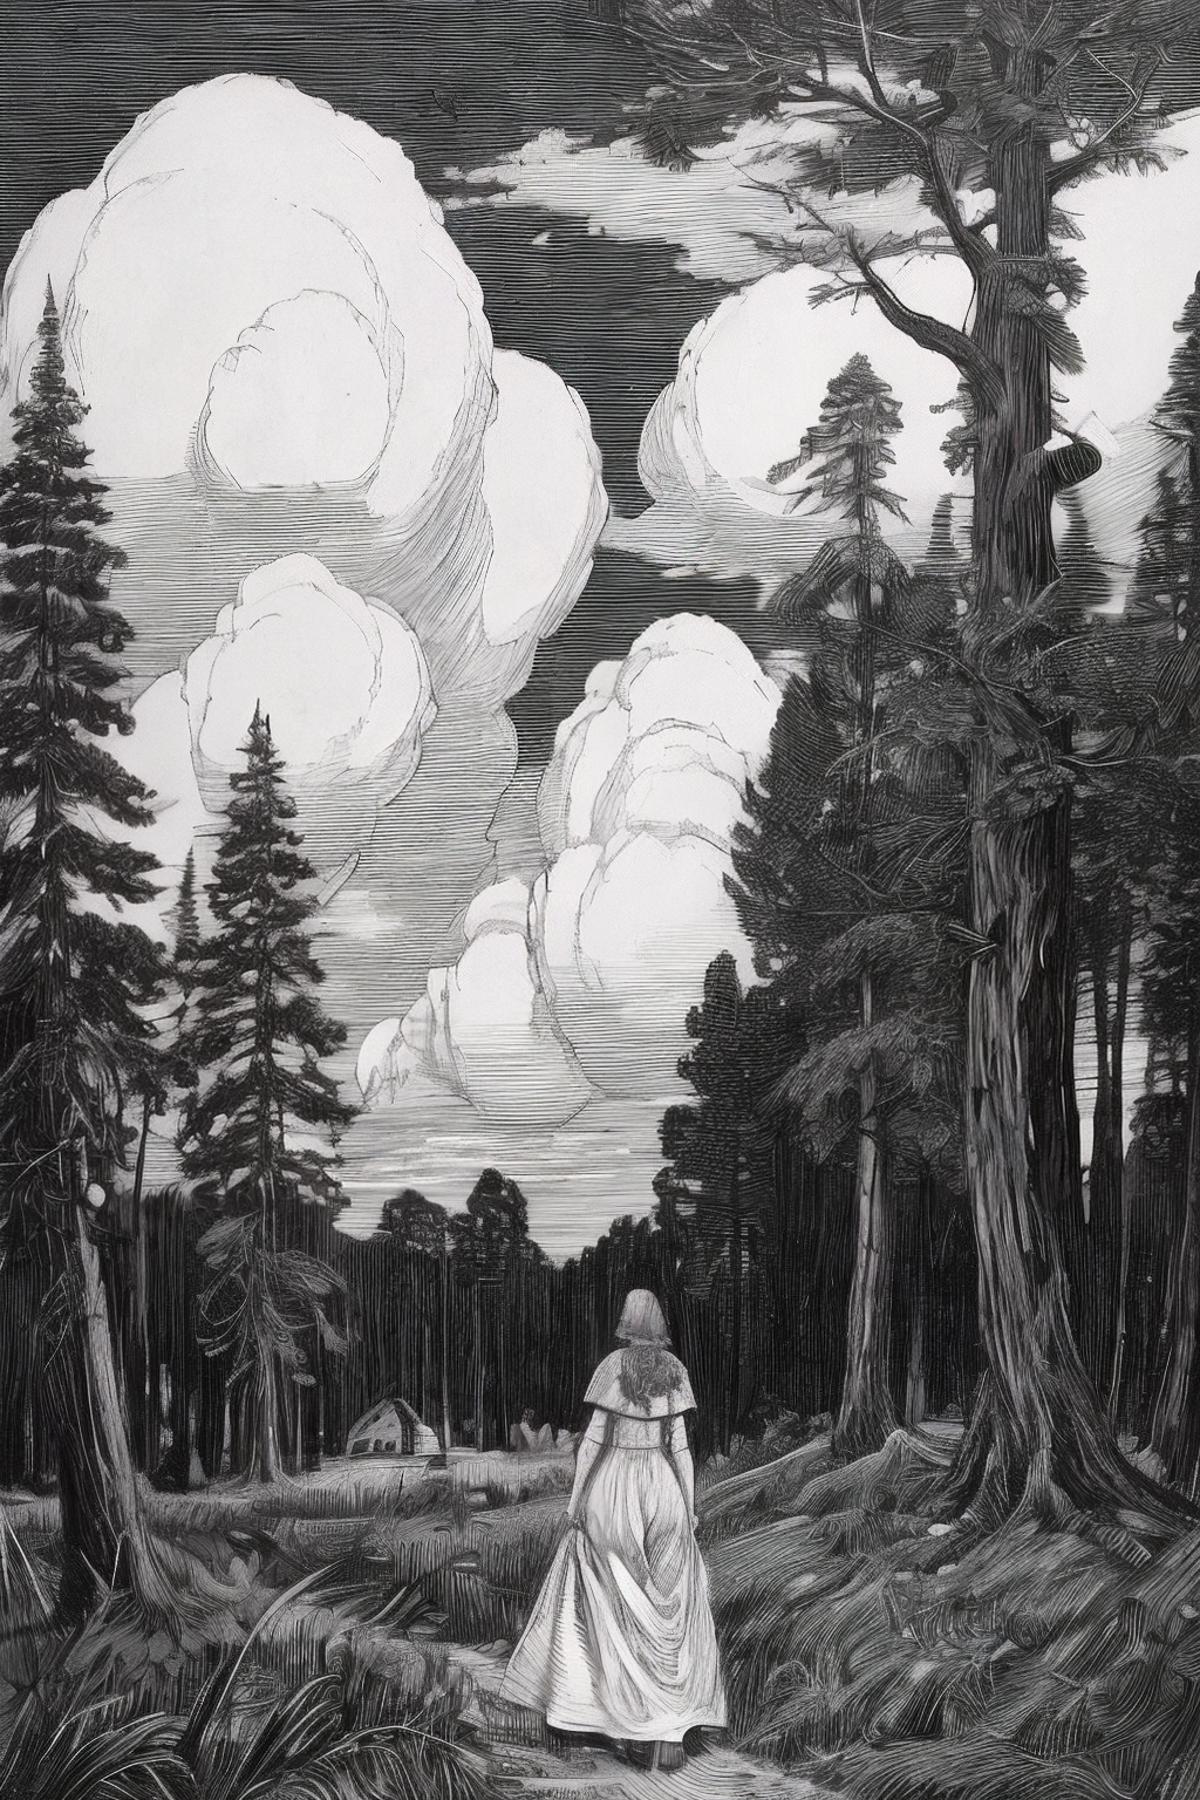 A girl in a white dress walking in the woods with clouds in the sky.